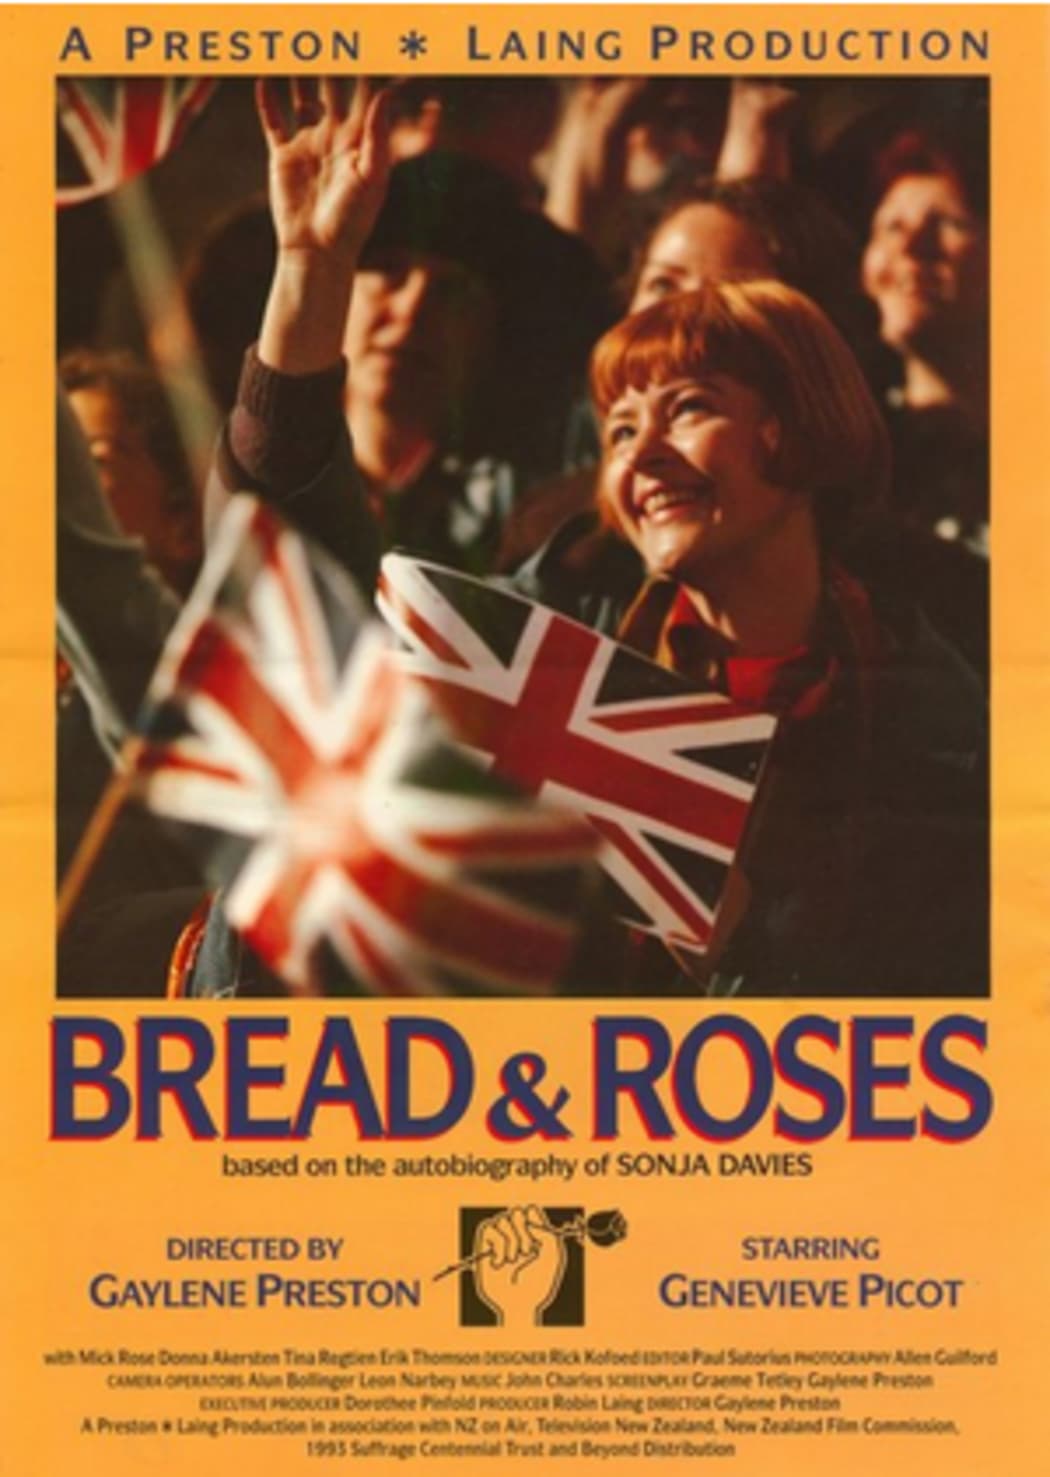 Bread and Roses posters